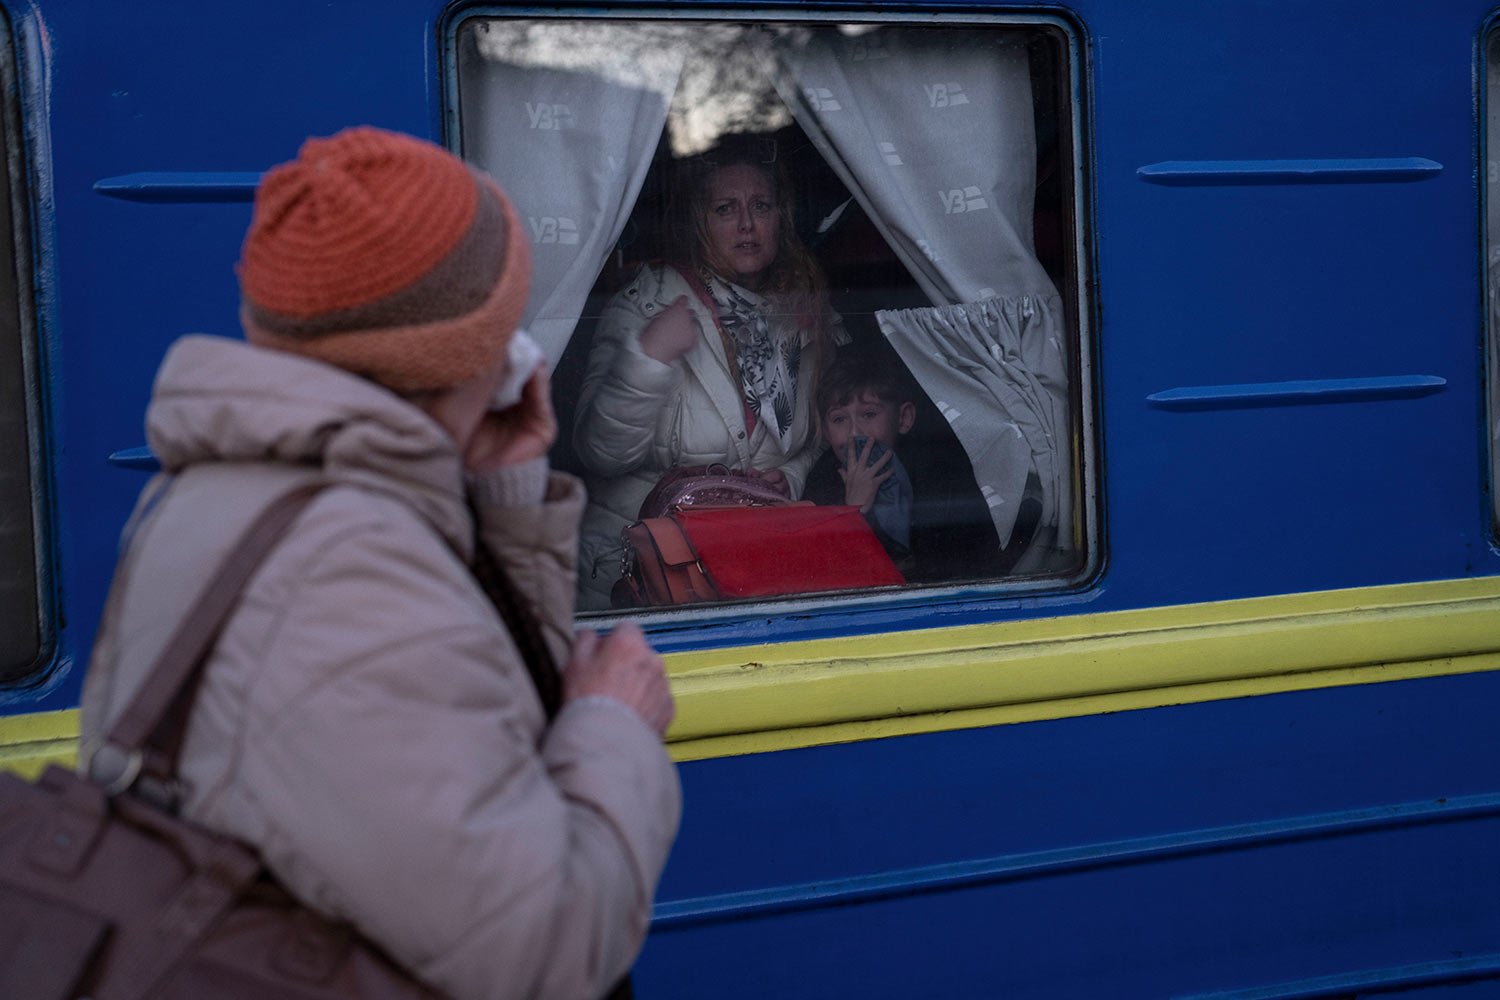  Ludmila, left, says goodbye to her granddaughter Kristina, who with her son Yaric, leave the train station in Odesa, southern Ukraine, on Tuesday, March 22, 2022. The U.N. refugee agency says more than 3.5 million people have fled Ukraine since Russ